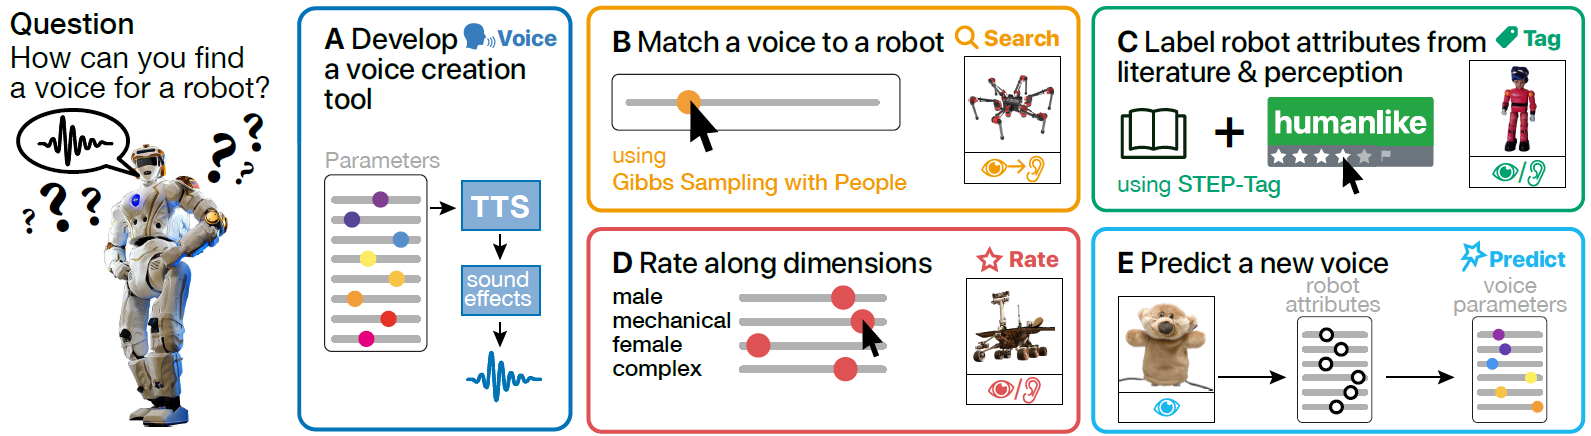 Giving Robots a Voice: Human-in-the-Loop Voice Creation and open-ended Labeling